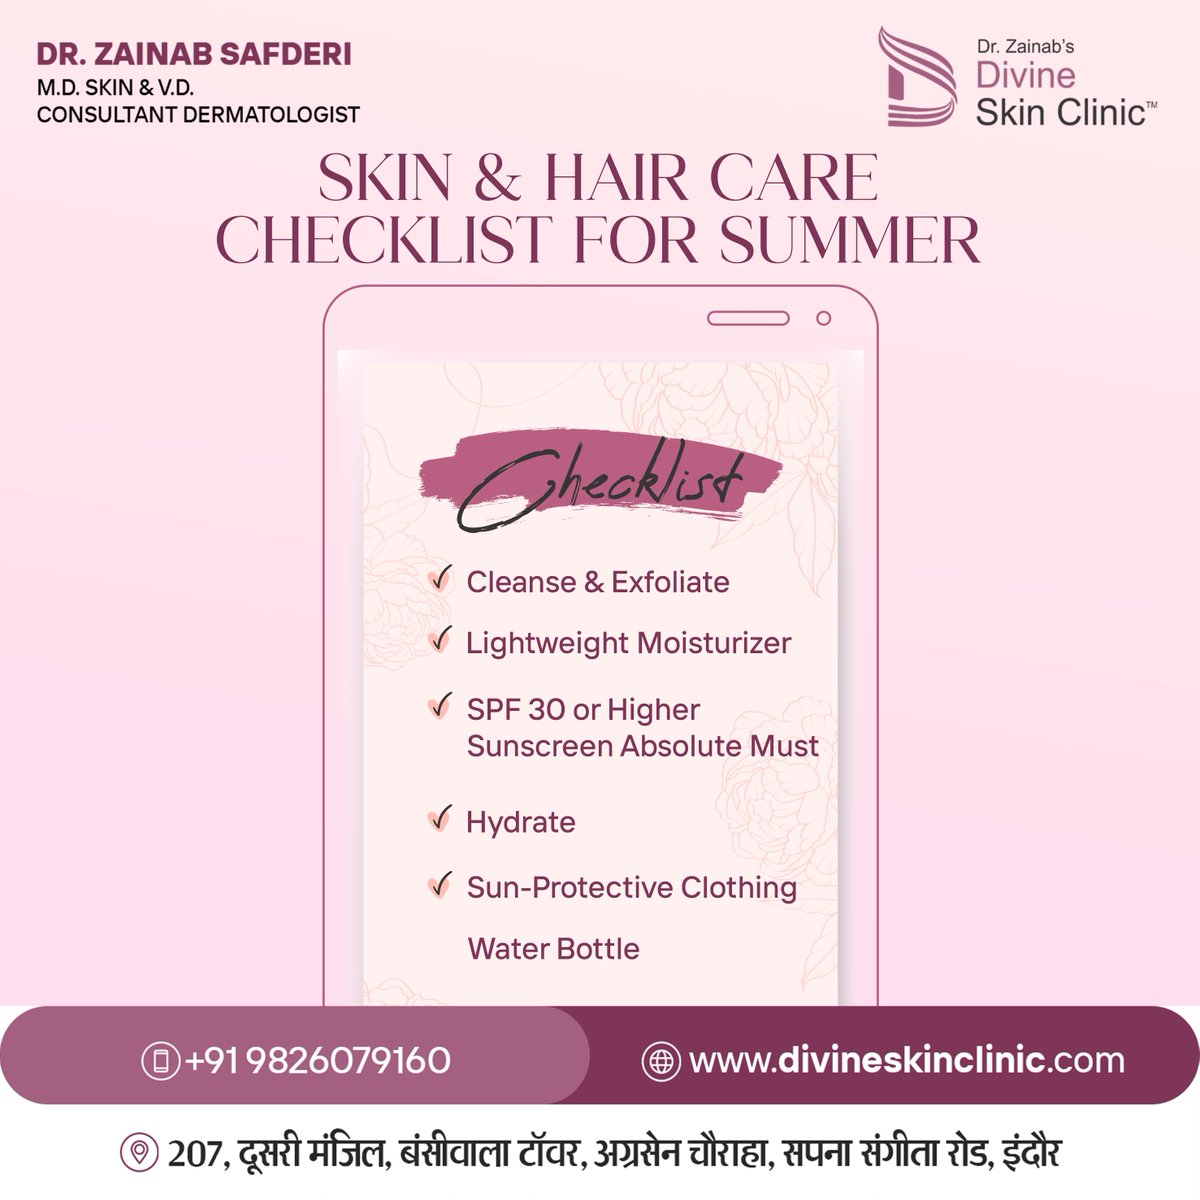 Get your summer glow on with our essential Skin & Hair Care Checklist! Stay radiant all season long🫶🥹 📞9826079160 📍207, Bansiwala Tower, Near, Agrasen Square, Navlakha #divineskinclinic #DrZainabSafderi #SkinRenewal #GlowingSkin#SkincareRoutine #DermatologyExpertise